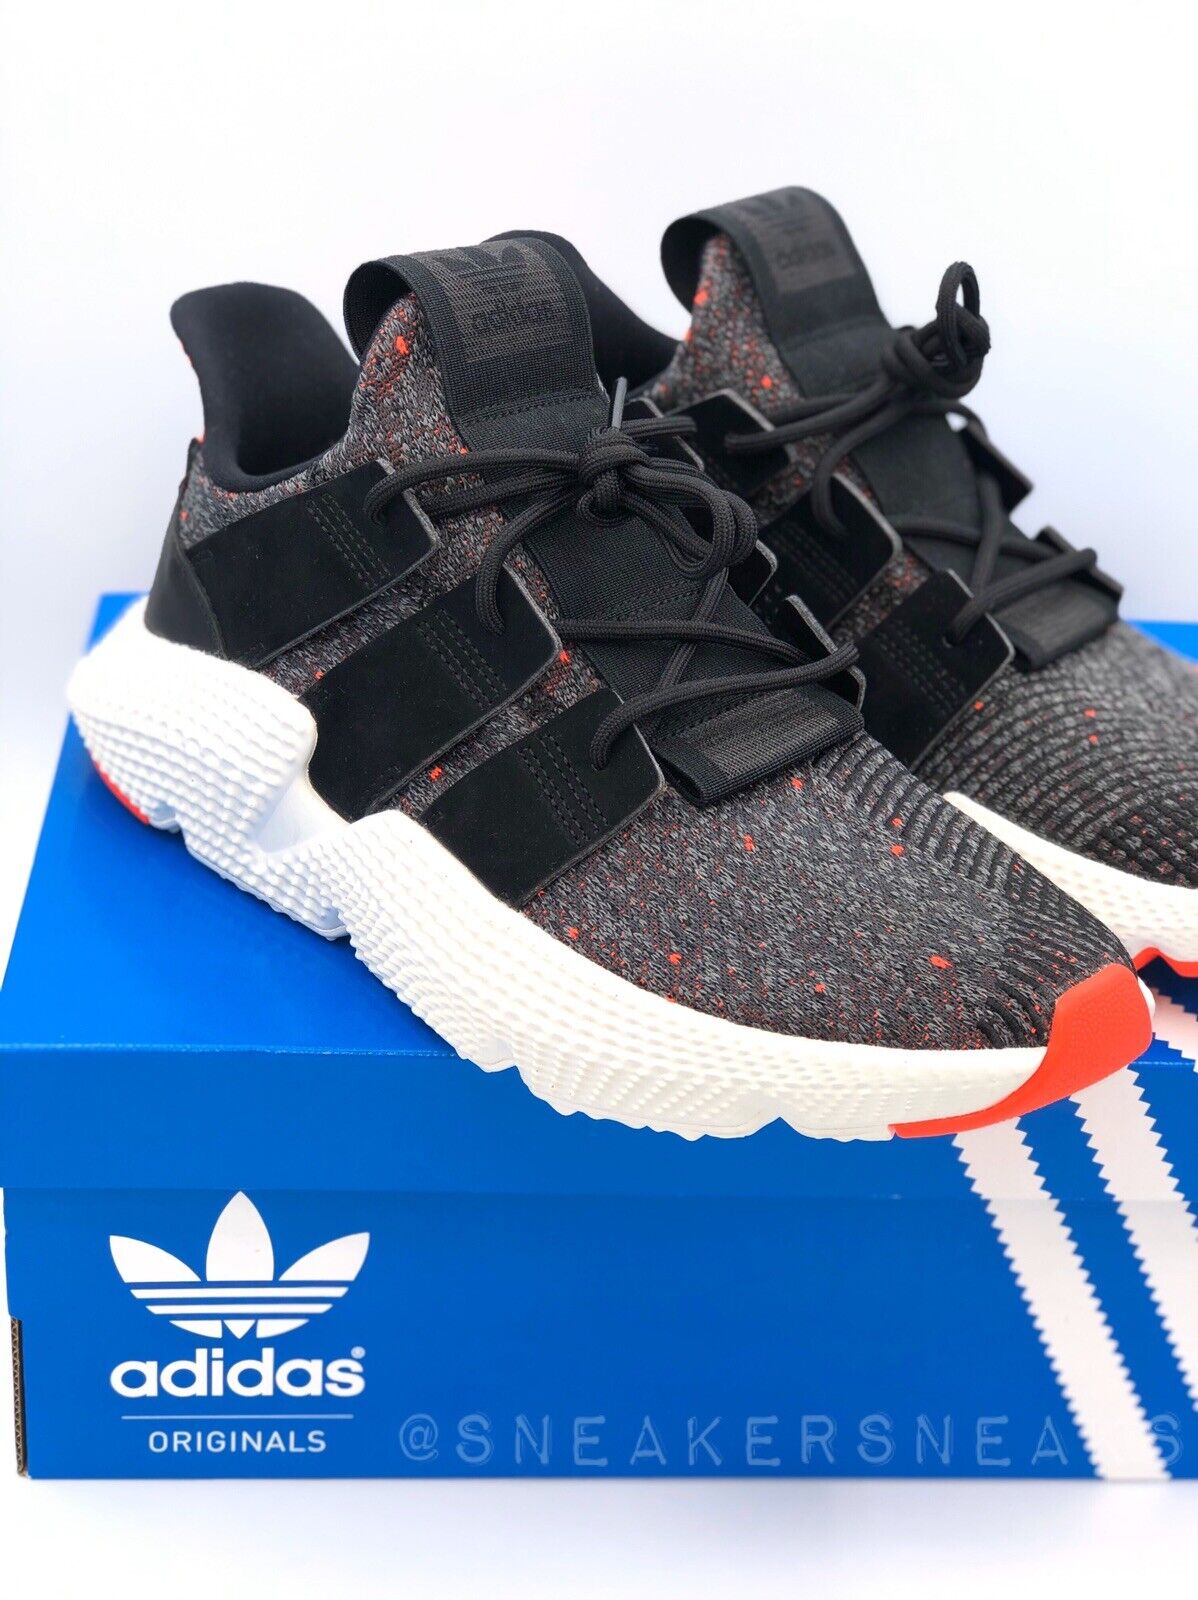 adidas prophere red white